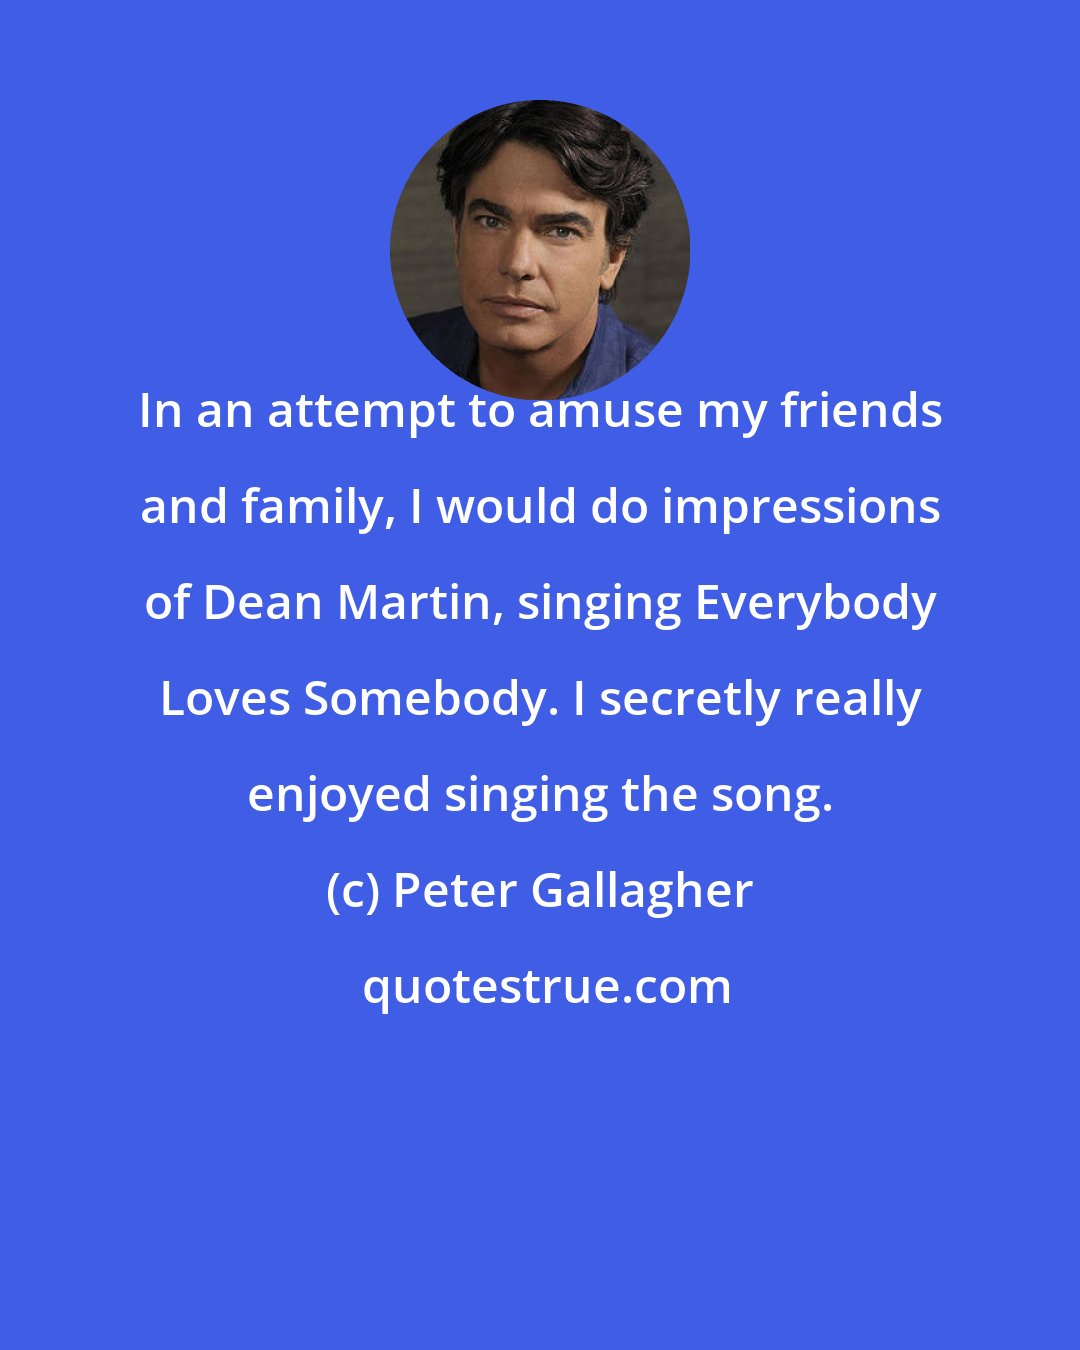 Peter Gallagher: In an attempt to amuse my friends and family, I would do impressions of Dean Martin, singing Everybody Loves Somebody. I secretly really enjoyed singing the song.